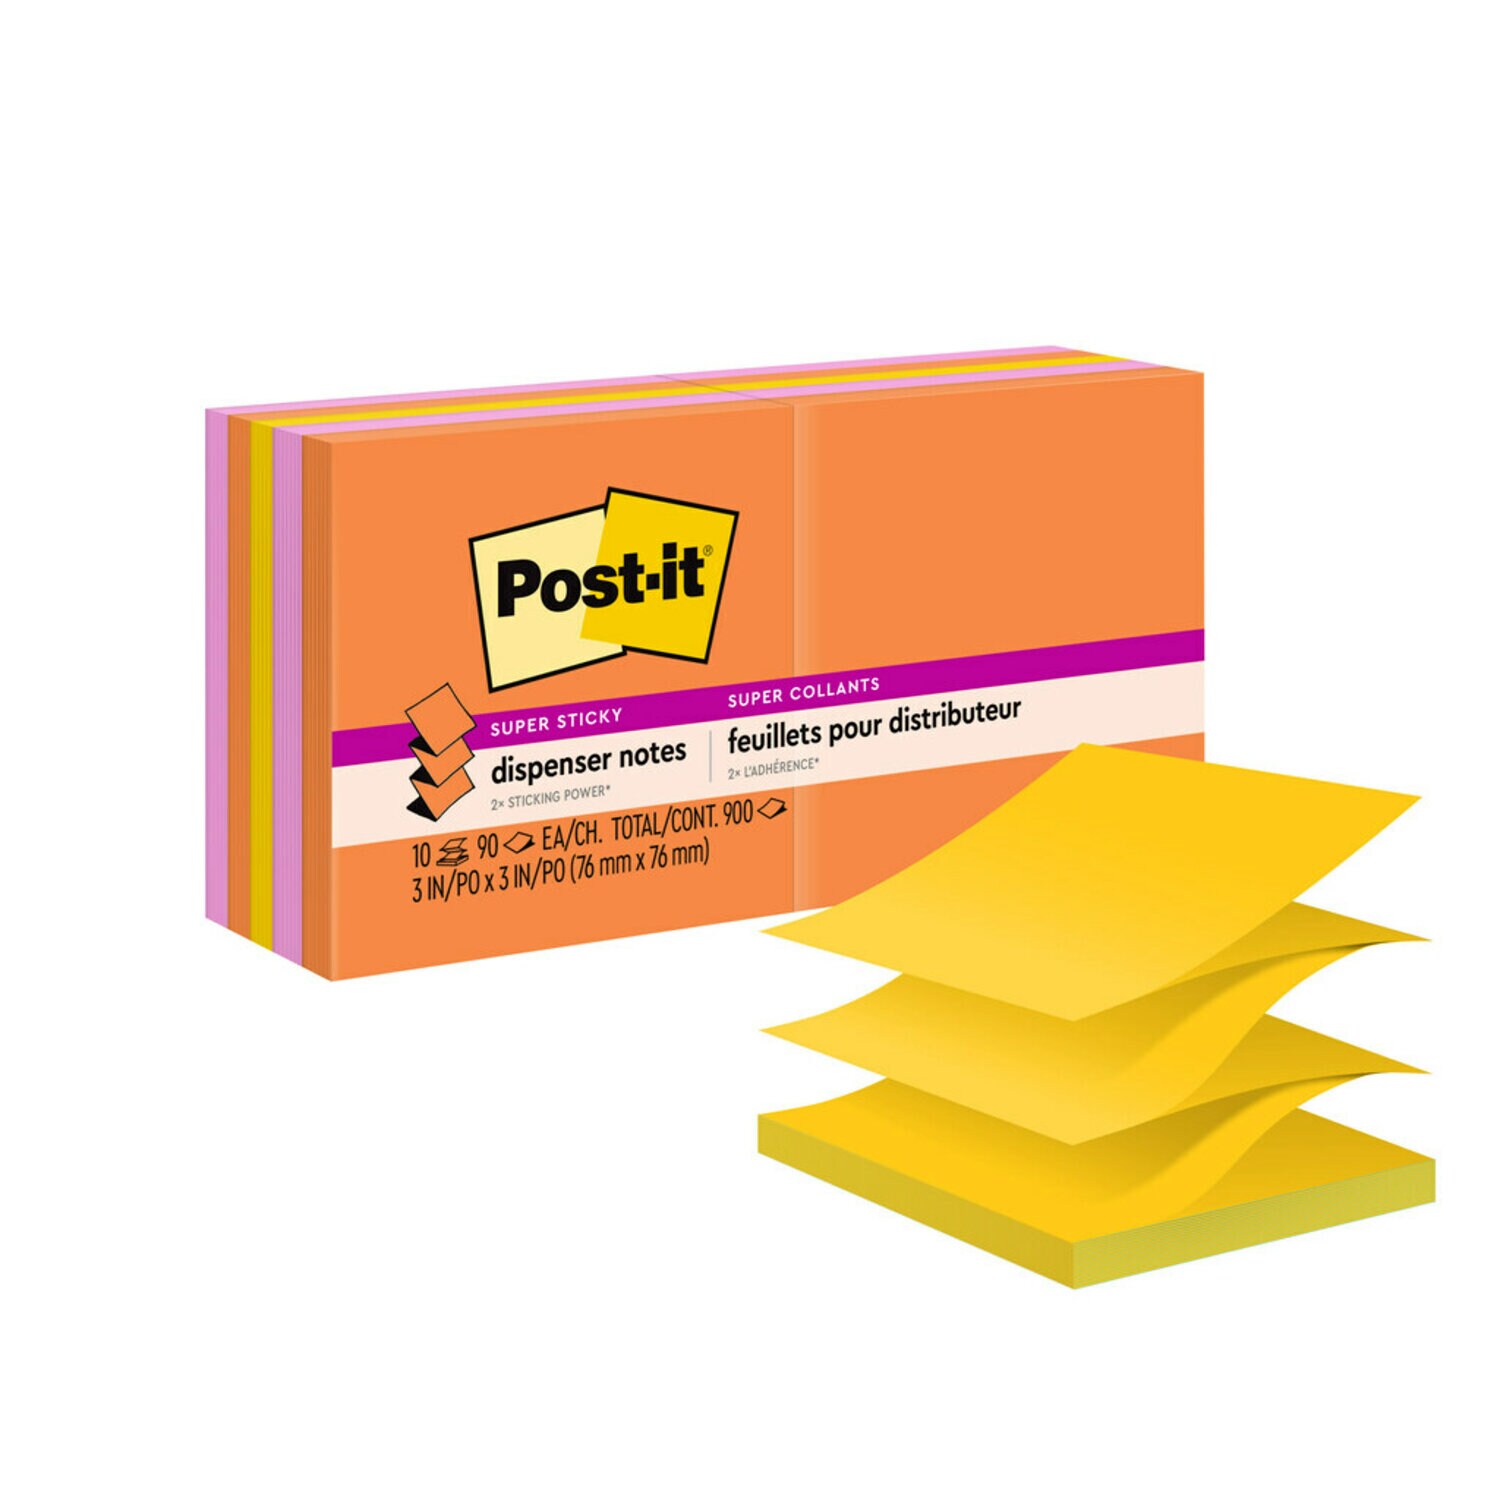 7100099373 - Post-it Super Sticky Dispenser Pop-up Notes R330-10SSAU, 3 in x 3 in (76 mm x 76 mm), 10 pads, 90 sheets/pad